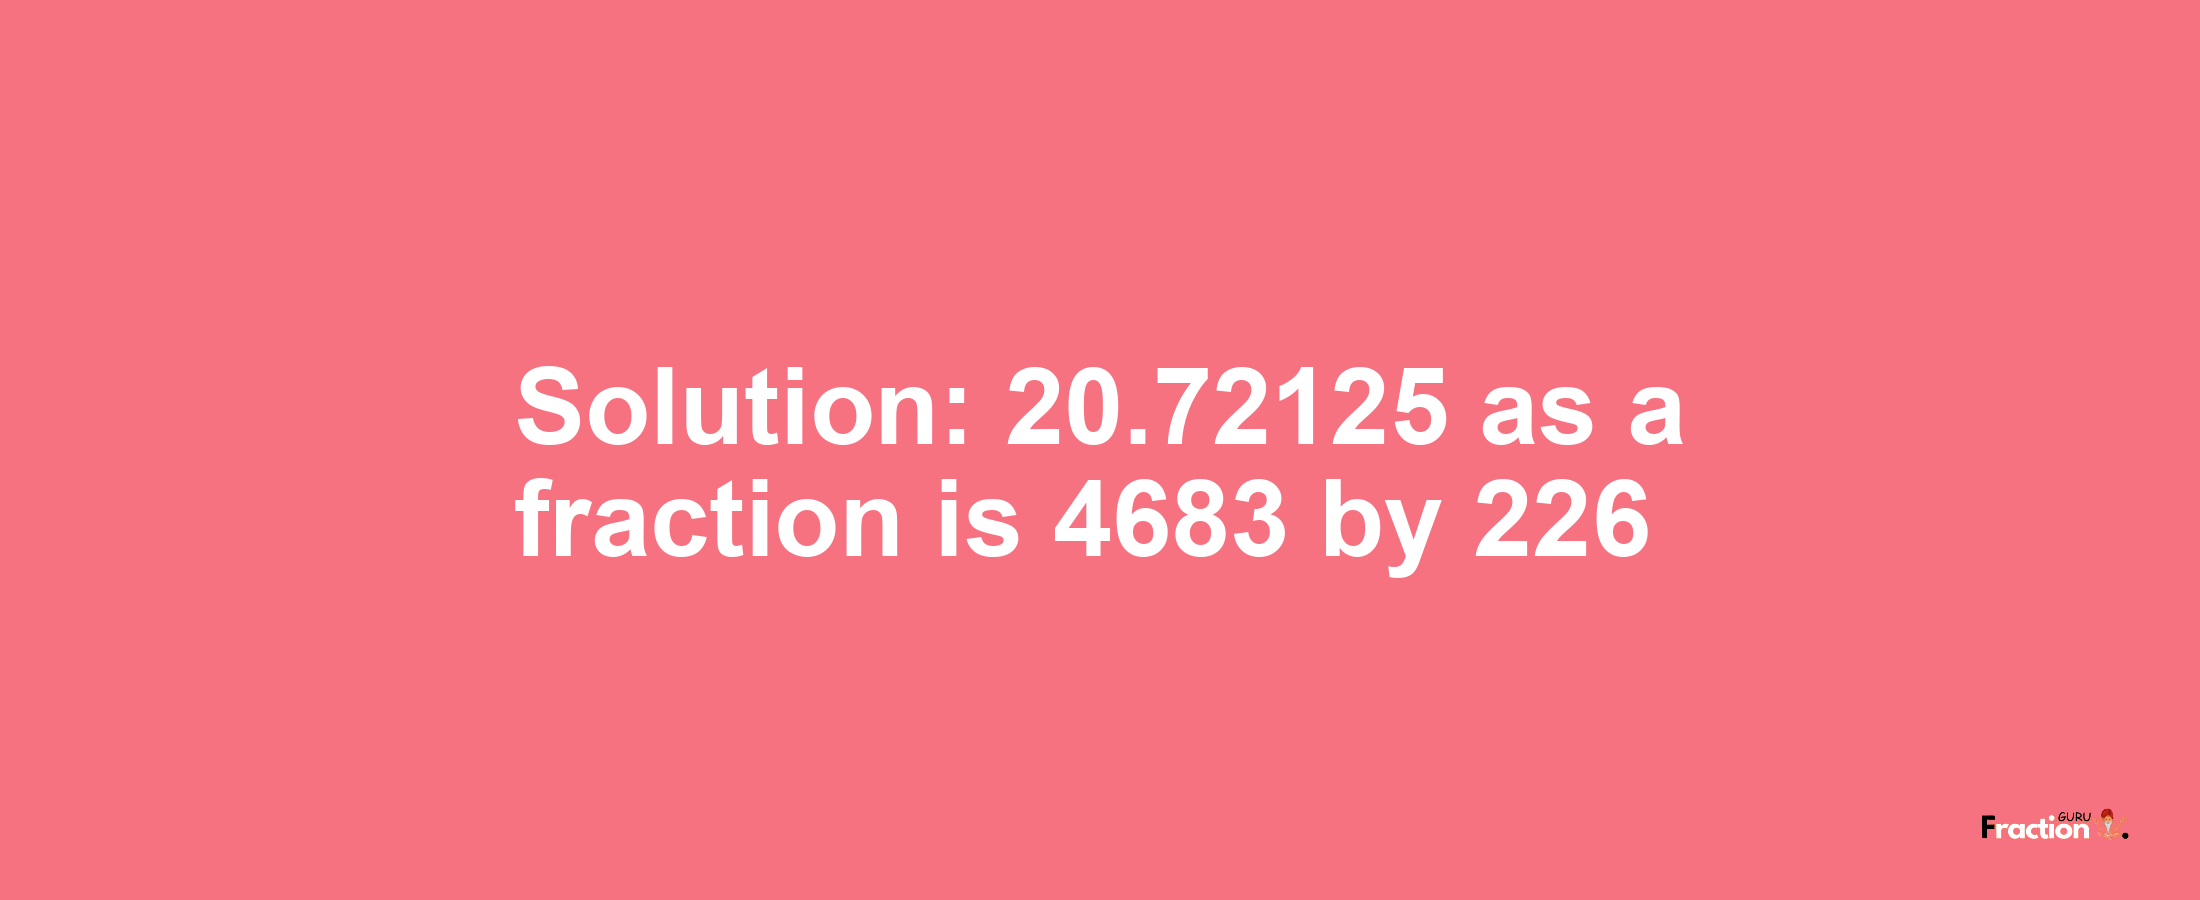 Solution:20.72125 as a fraction is 4683/226